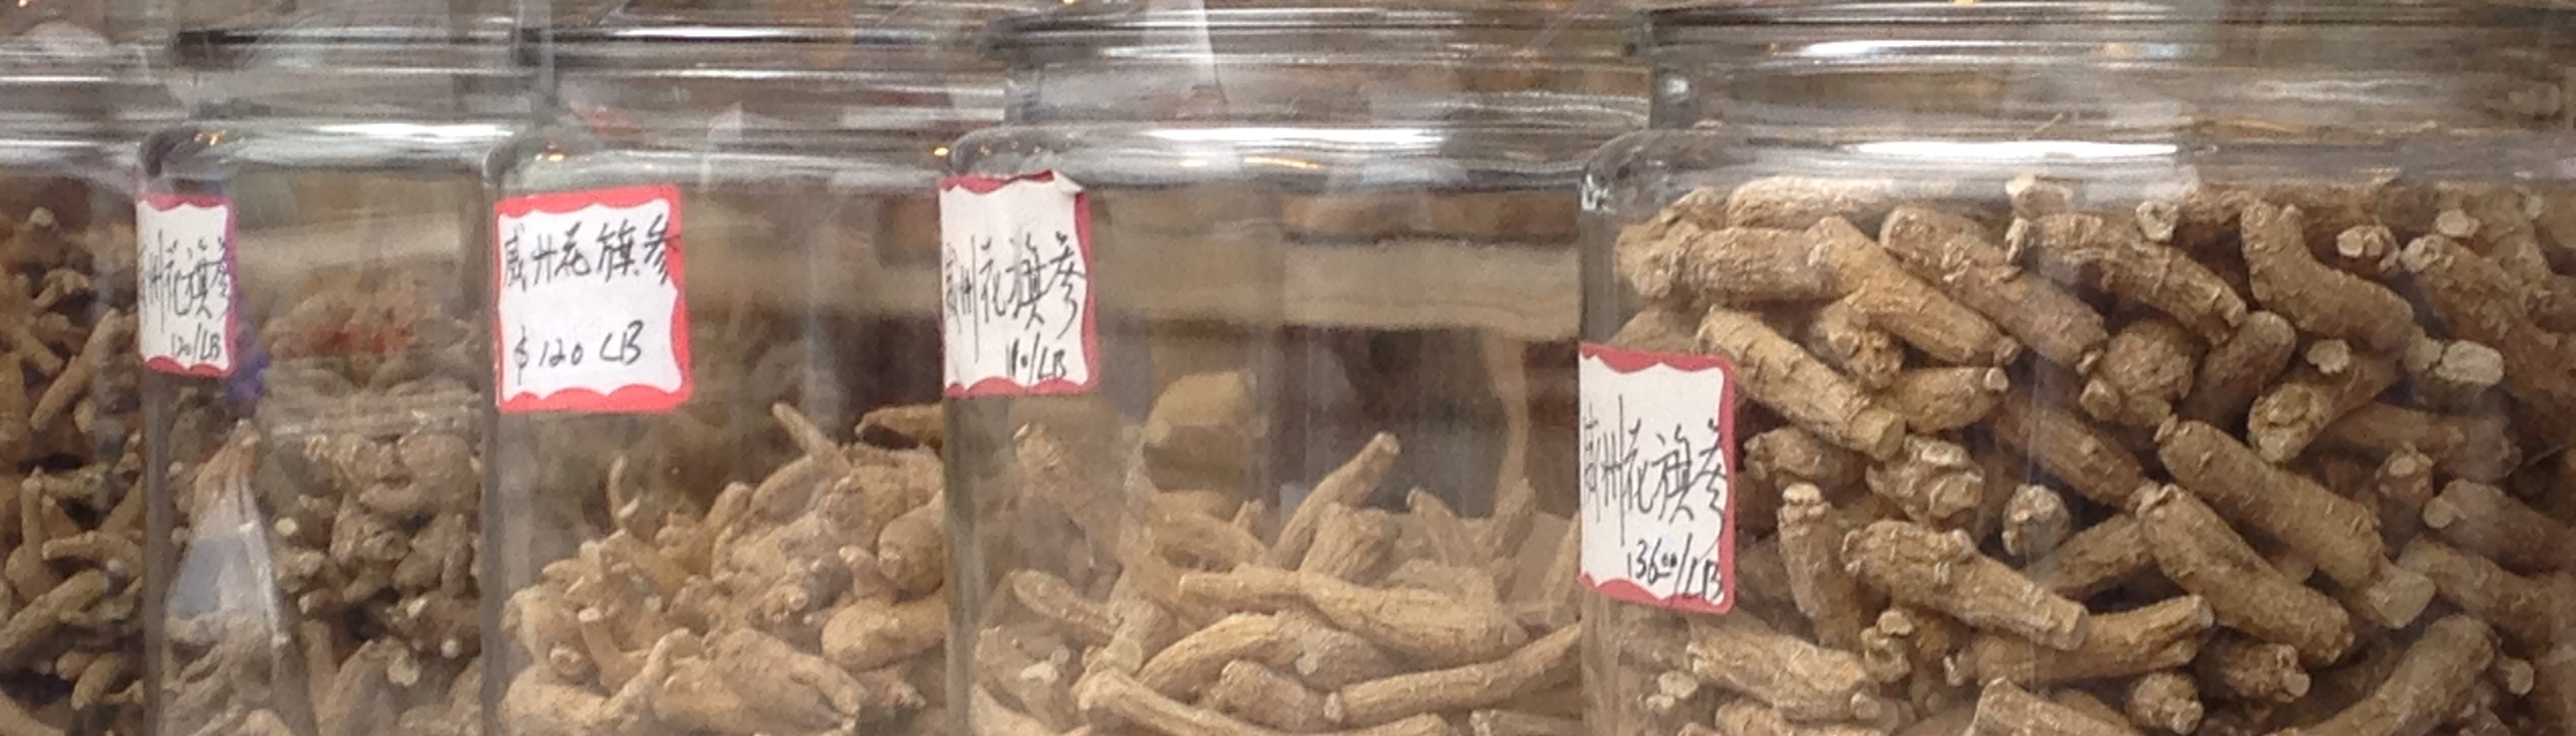 Chinese Herbs and Spices